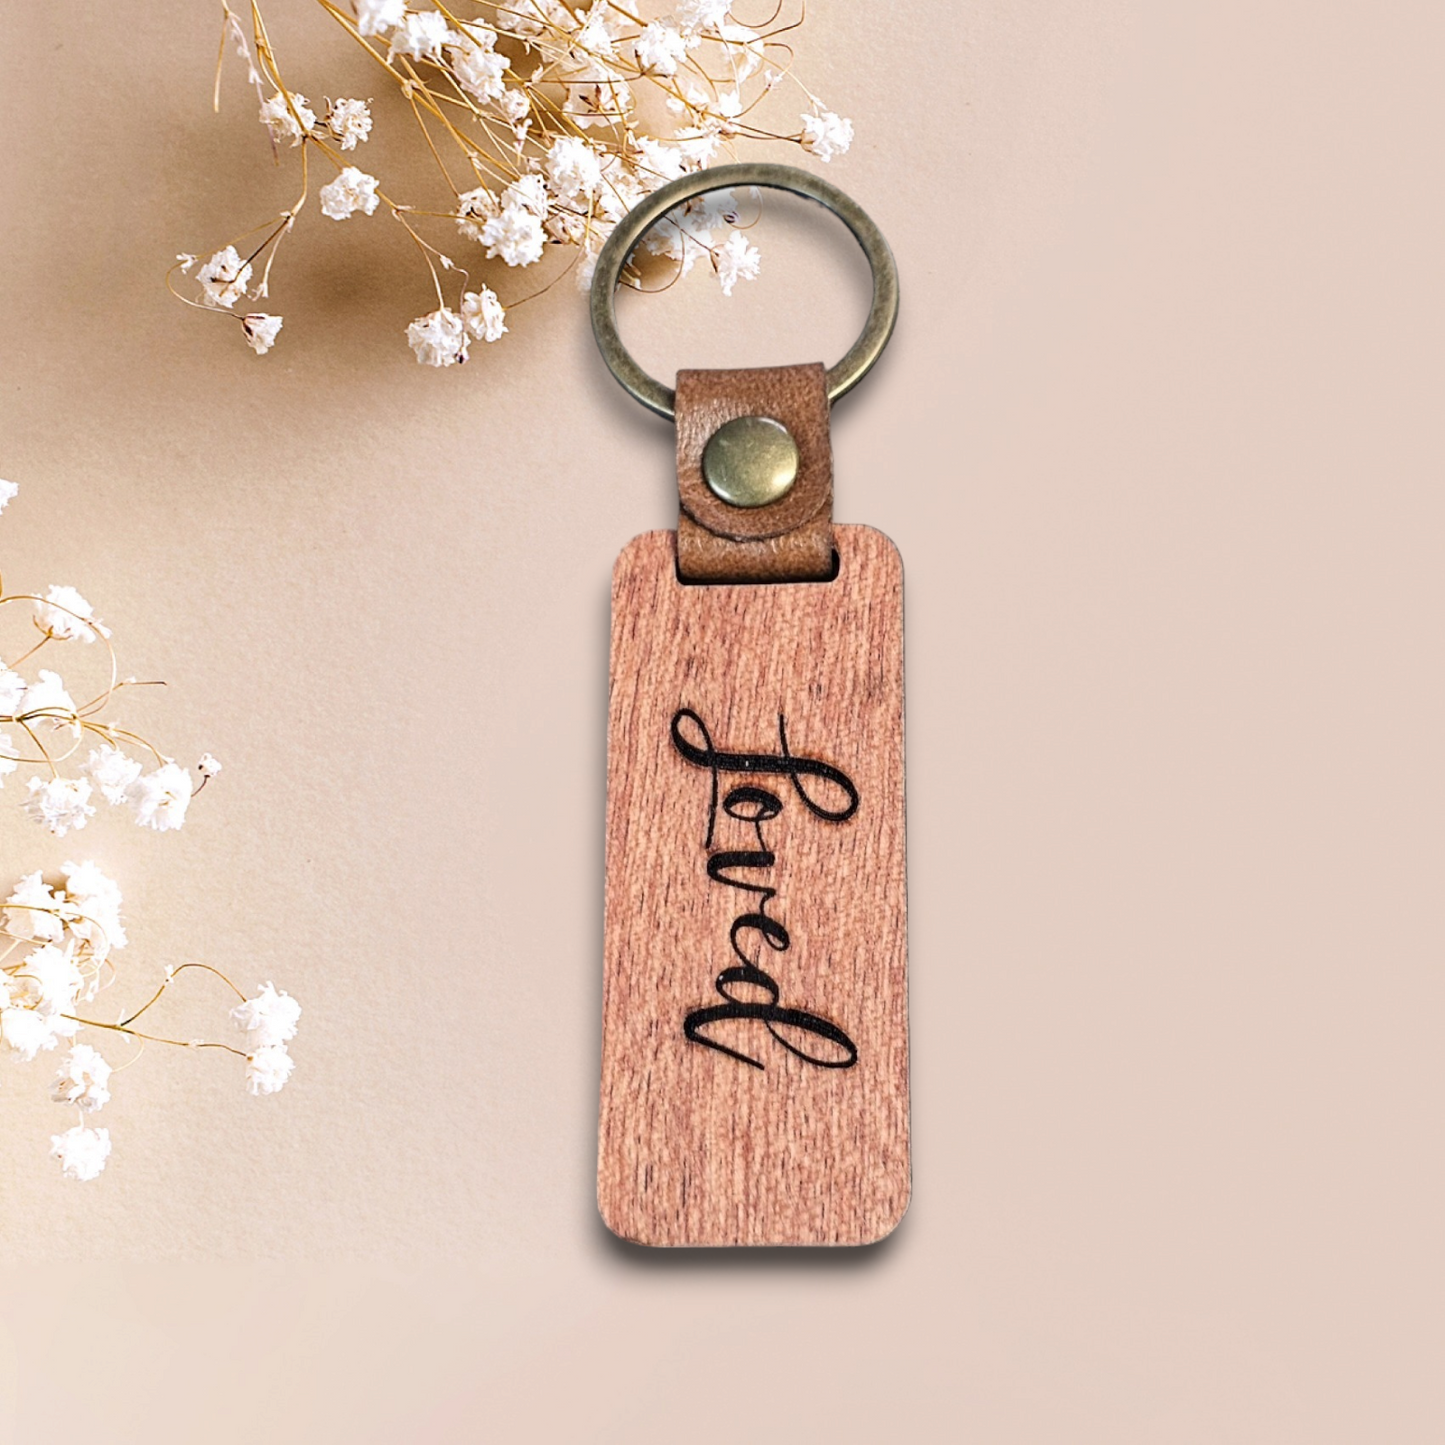 Keychain - Wood Engraved